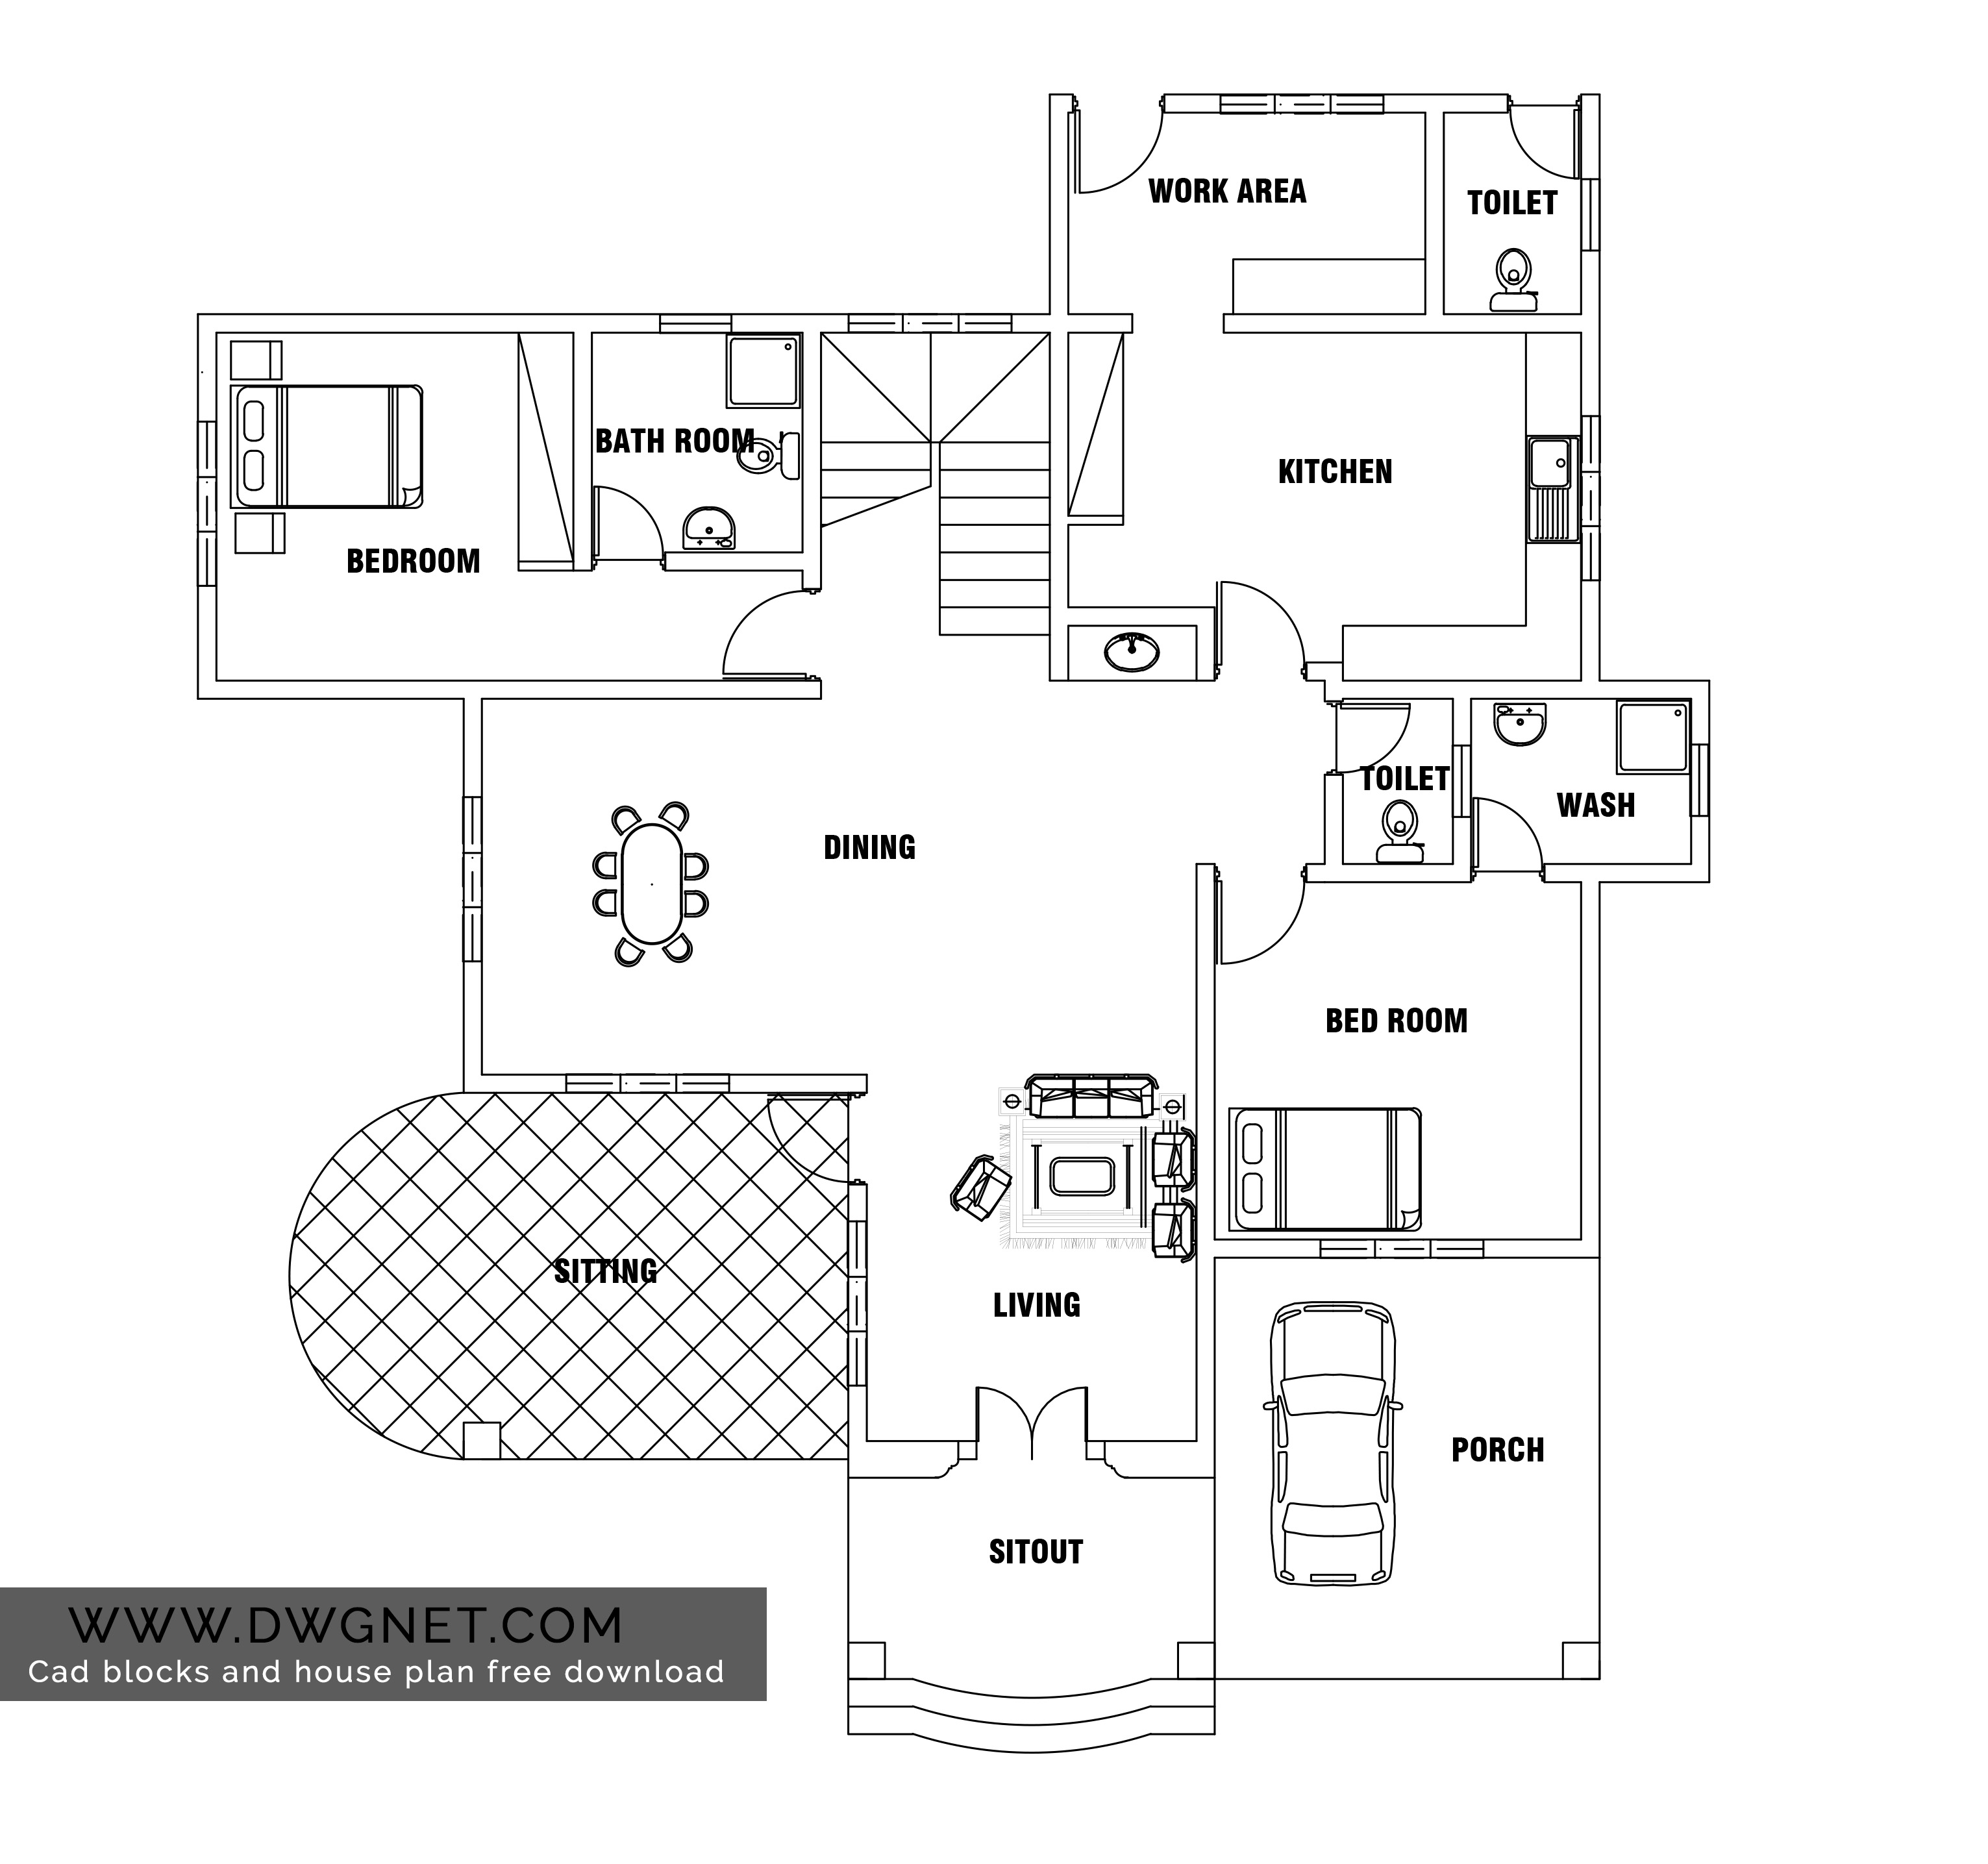 http://www.dwgnet.com/wp-content/uploads/2016/09/two-bed-room-european-style-small-house-plan-free-download-with-dwg-cad-file-from-dwgnet.jpg